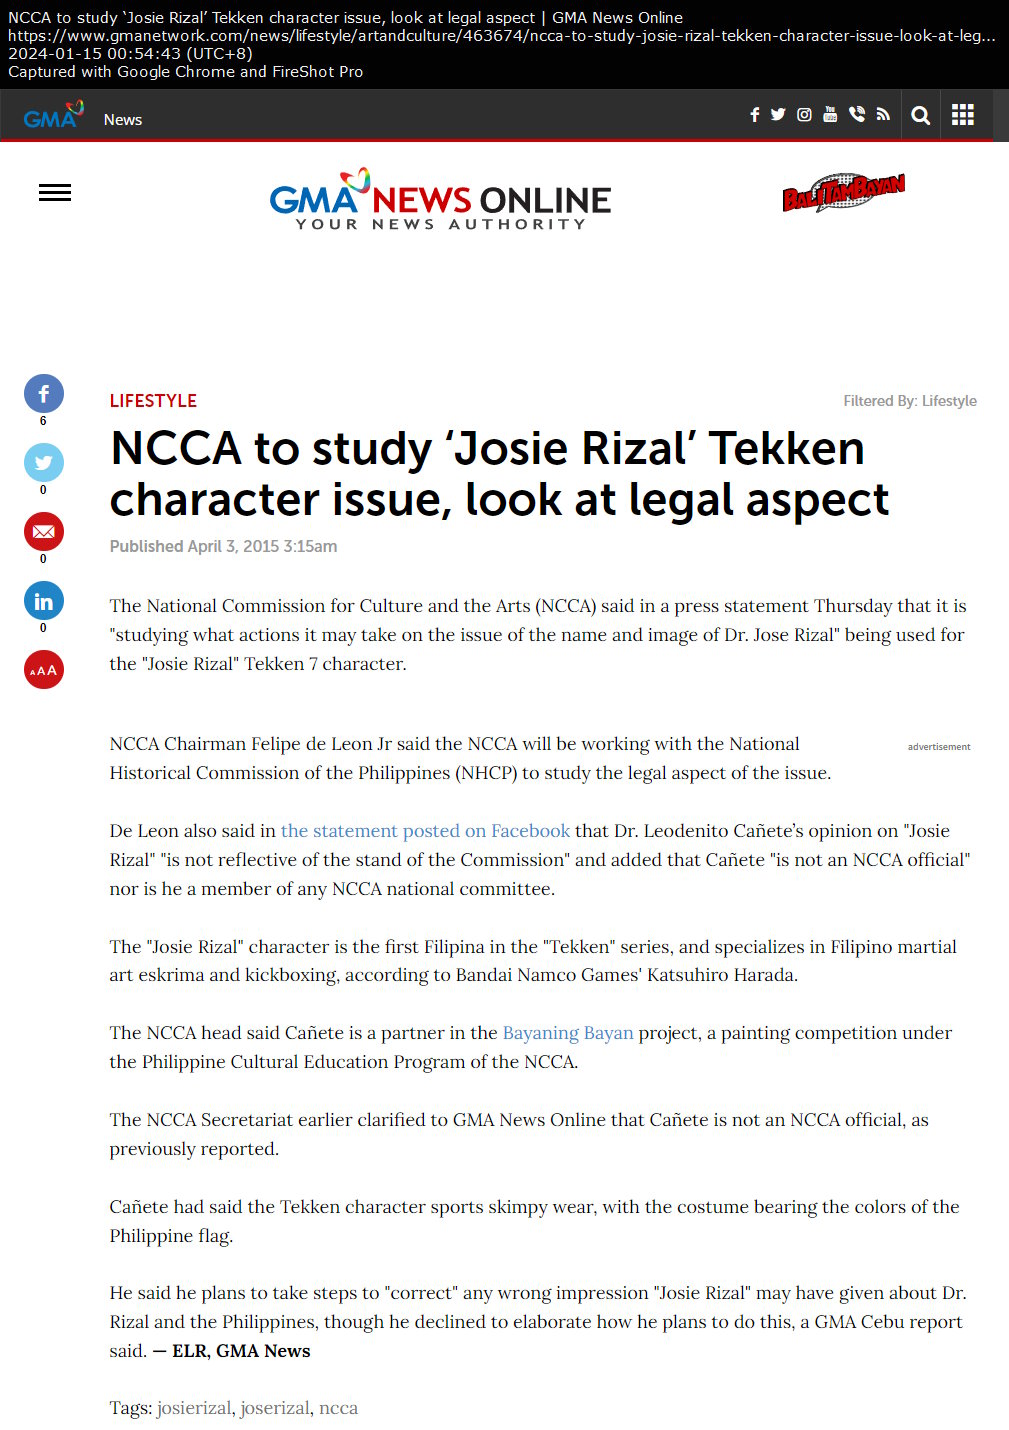 NCCA to study ‘Josie Rizal’ Tekken character issue, look at legal aspect